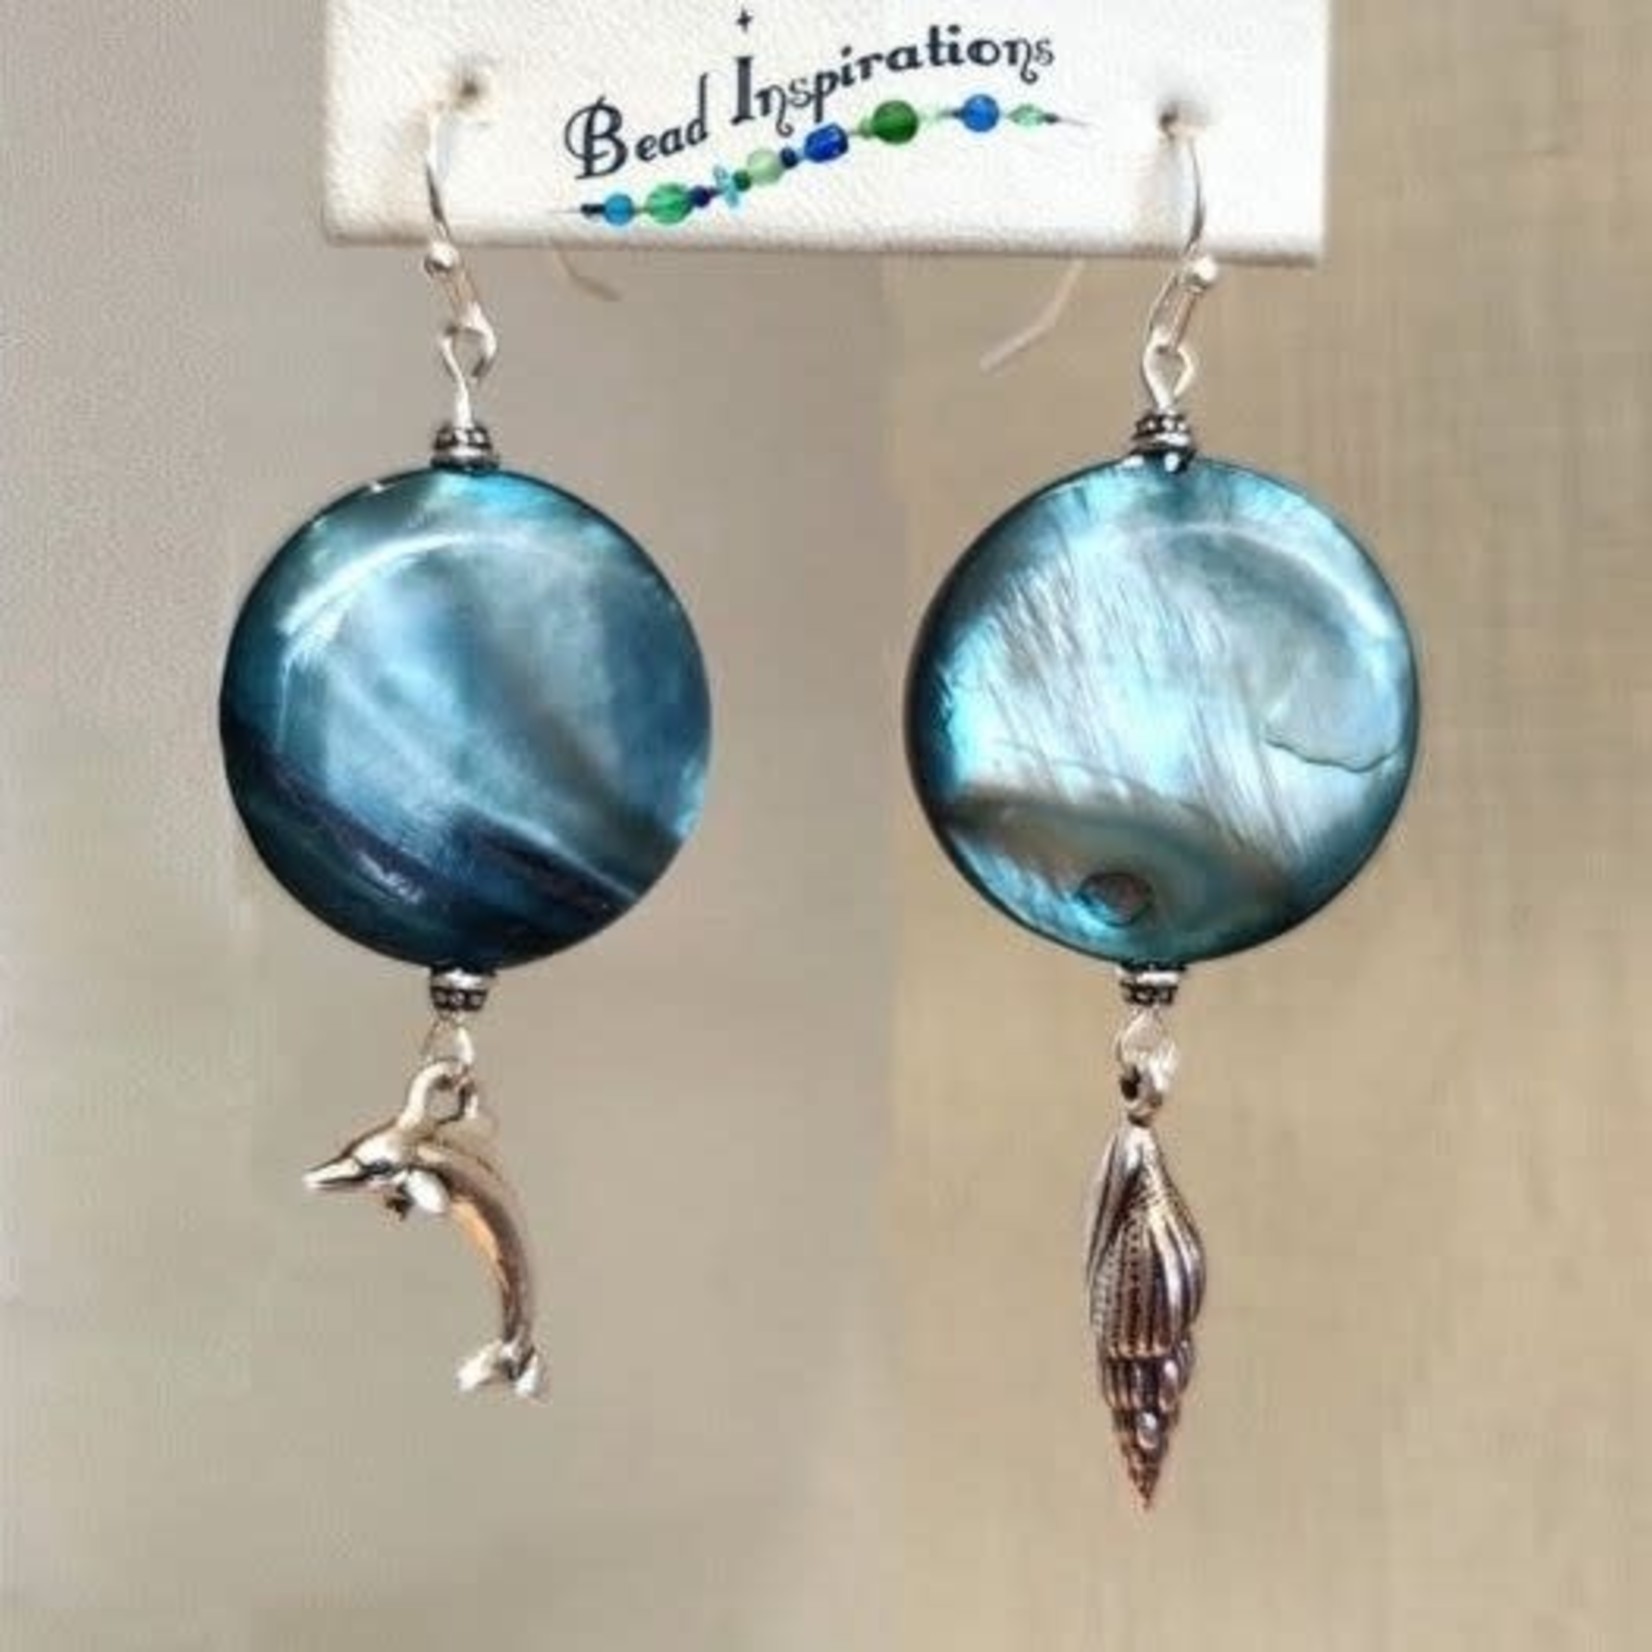 Bead Inspirations Dolphin at Play Earring Kit